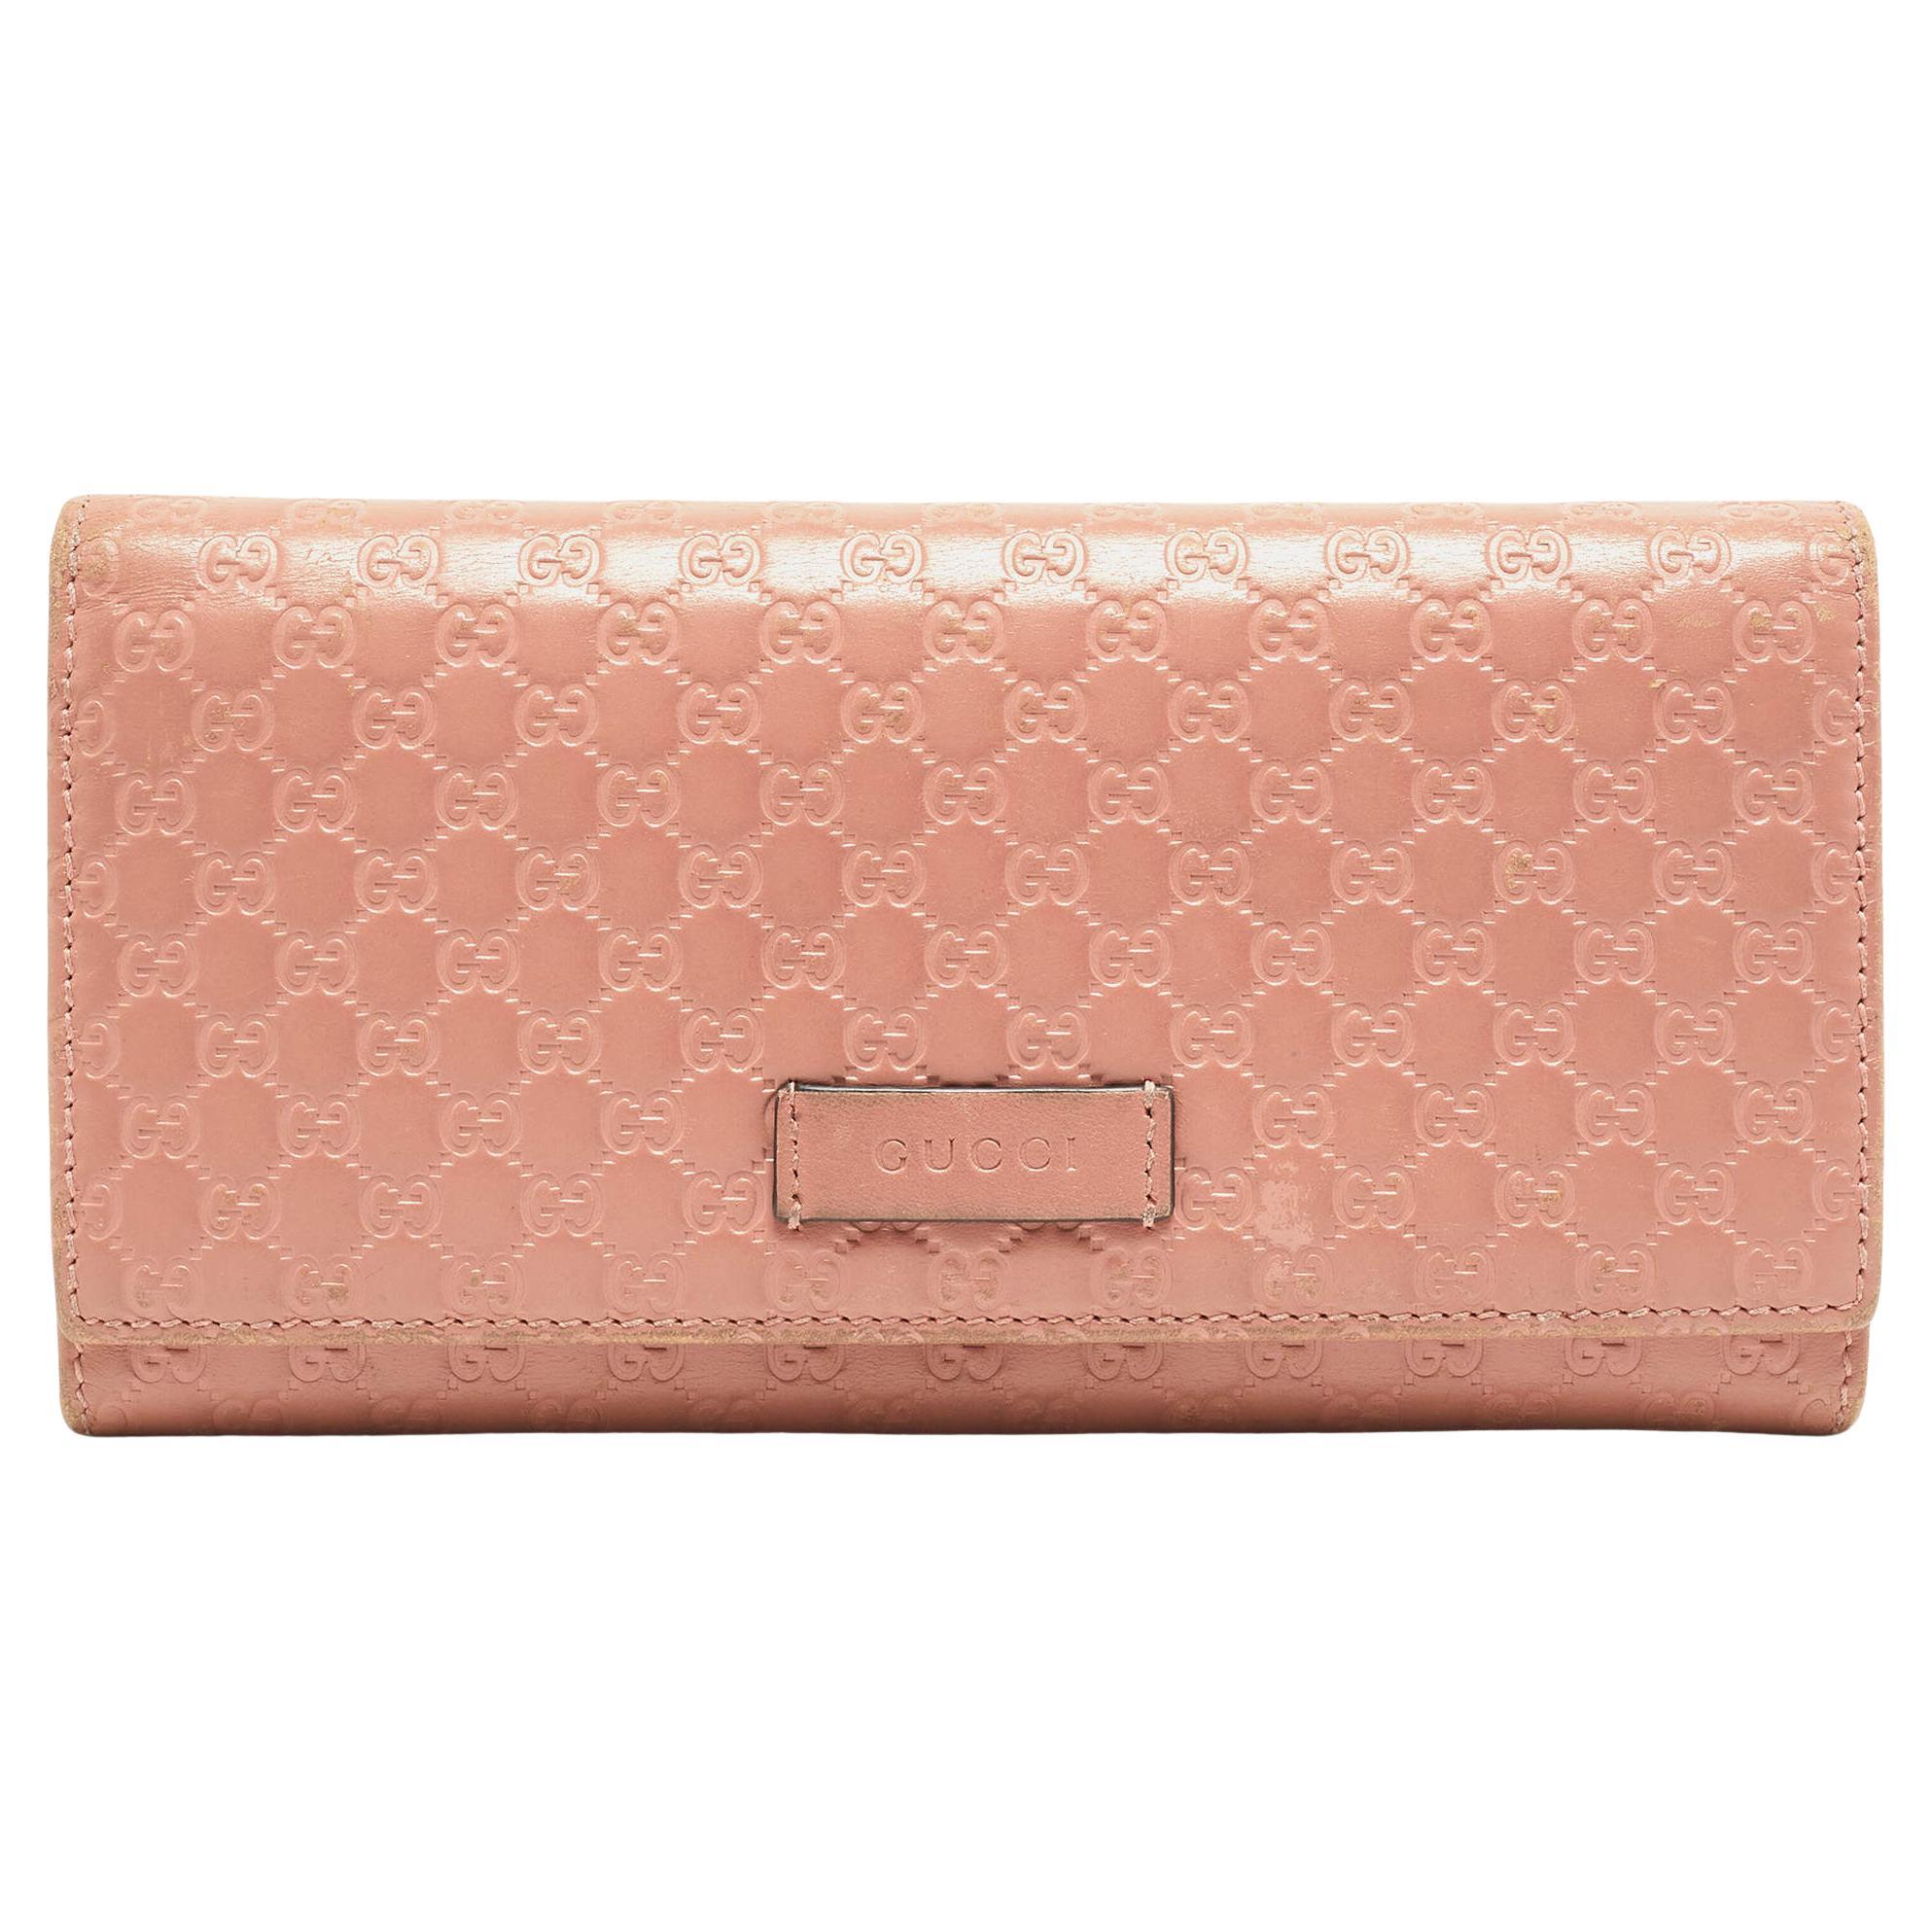 Gucci Pink Microgucissima Leather Flap Continental Wallet For Sale